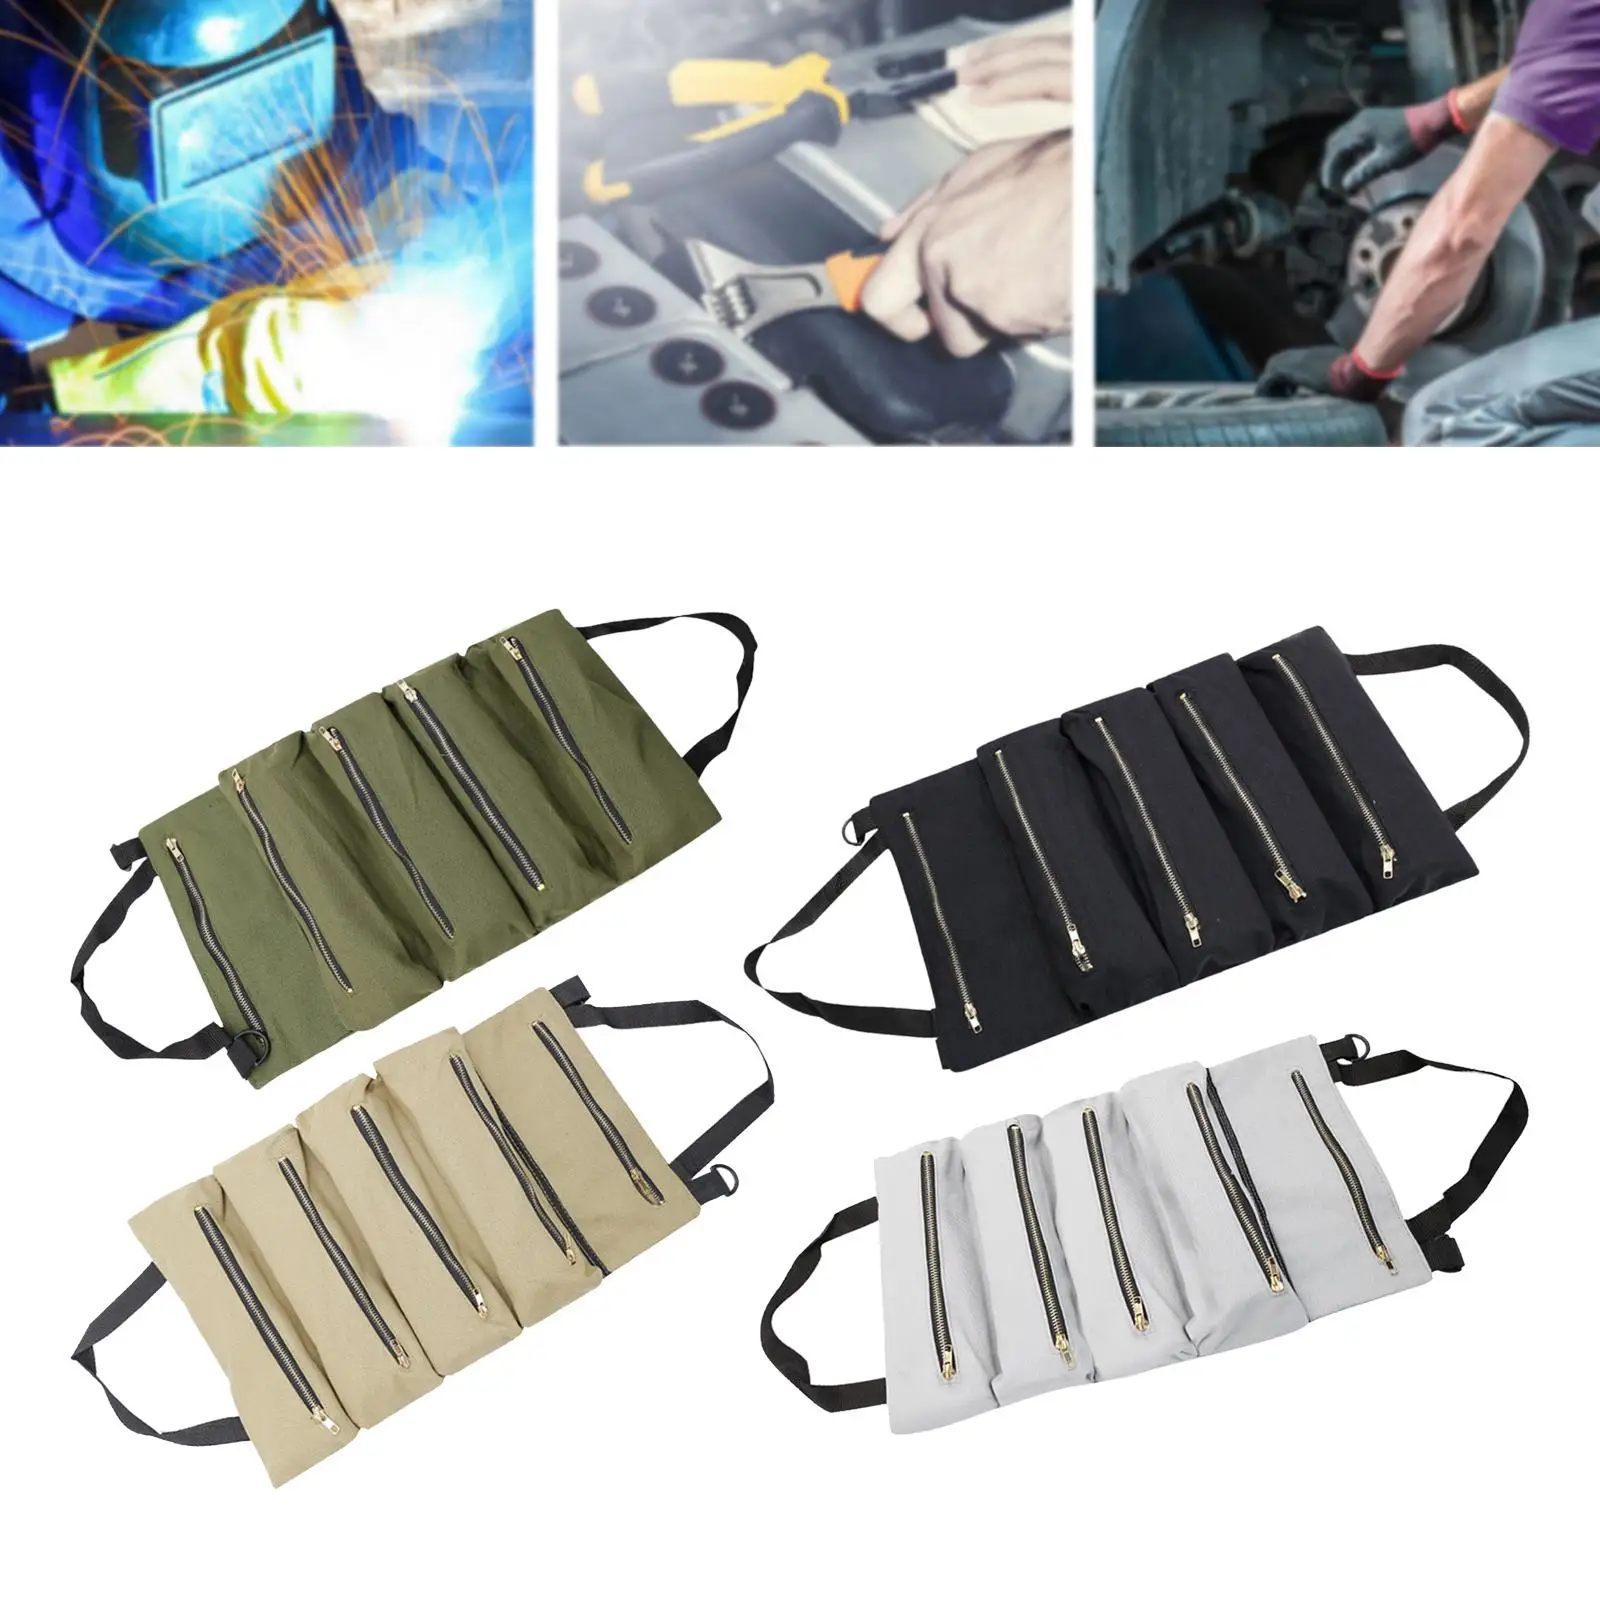 Wrench Tools Pouch Tool Organizers Bucket Hanging Tool Folding Roll up Tool Bag Small Tool Bag for Camping Gear Plumber Mechanic